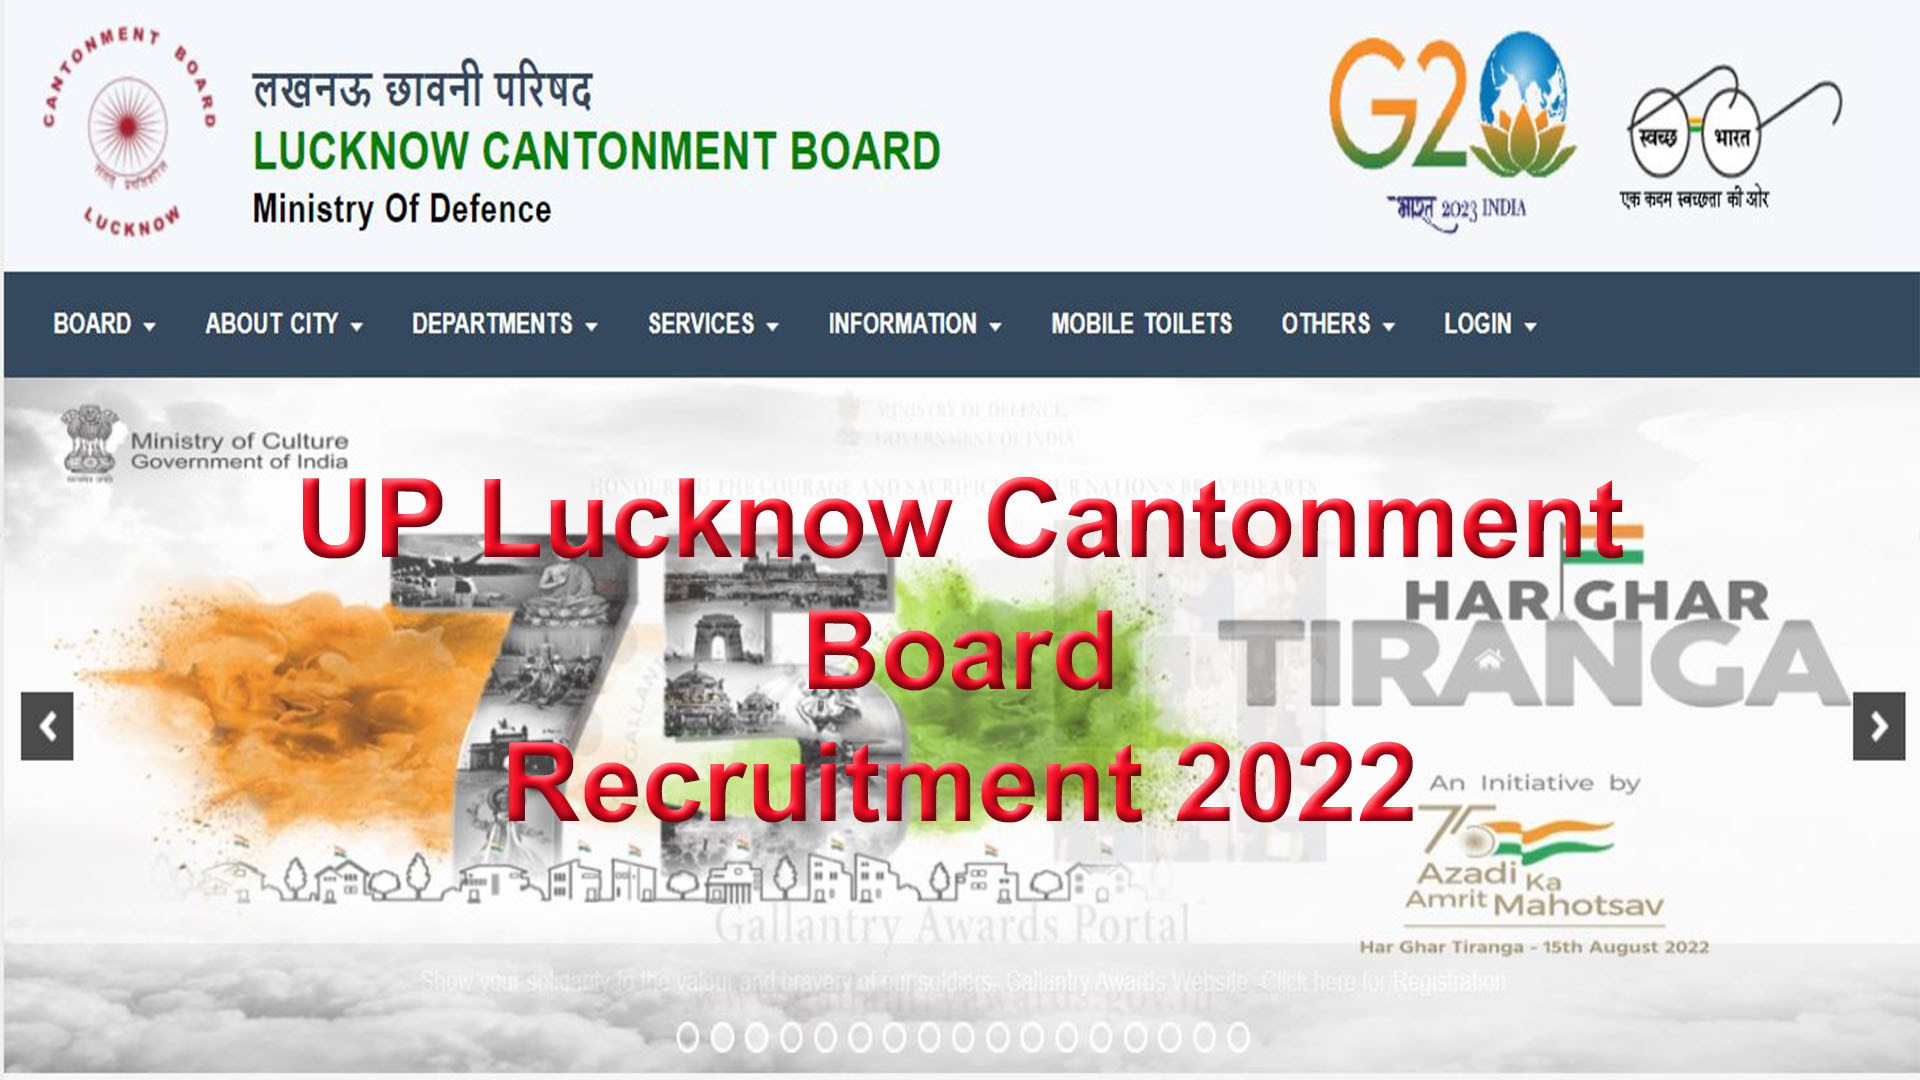 UP Lucknow Cantonment Board Recruitment 2022